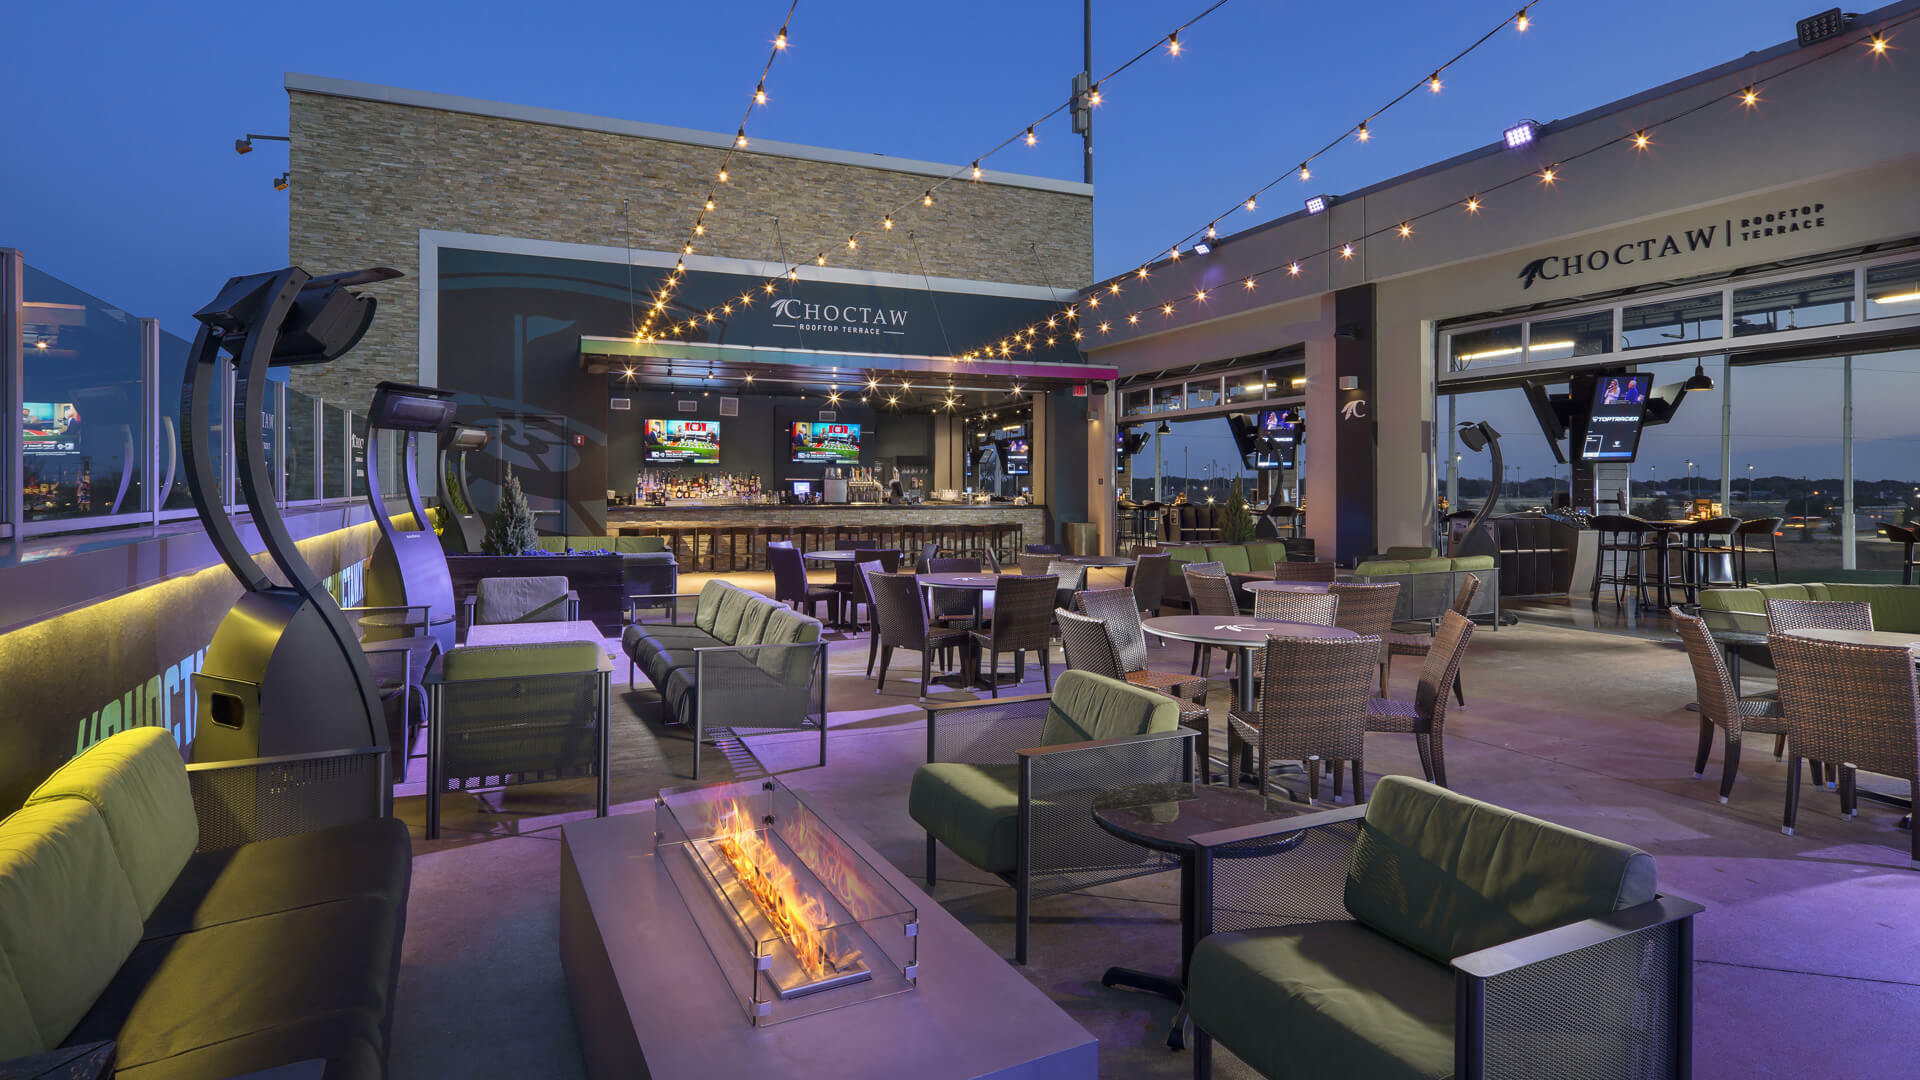 Rooftop terrace with fire pits